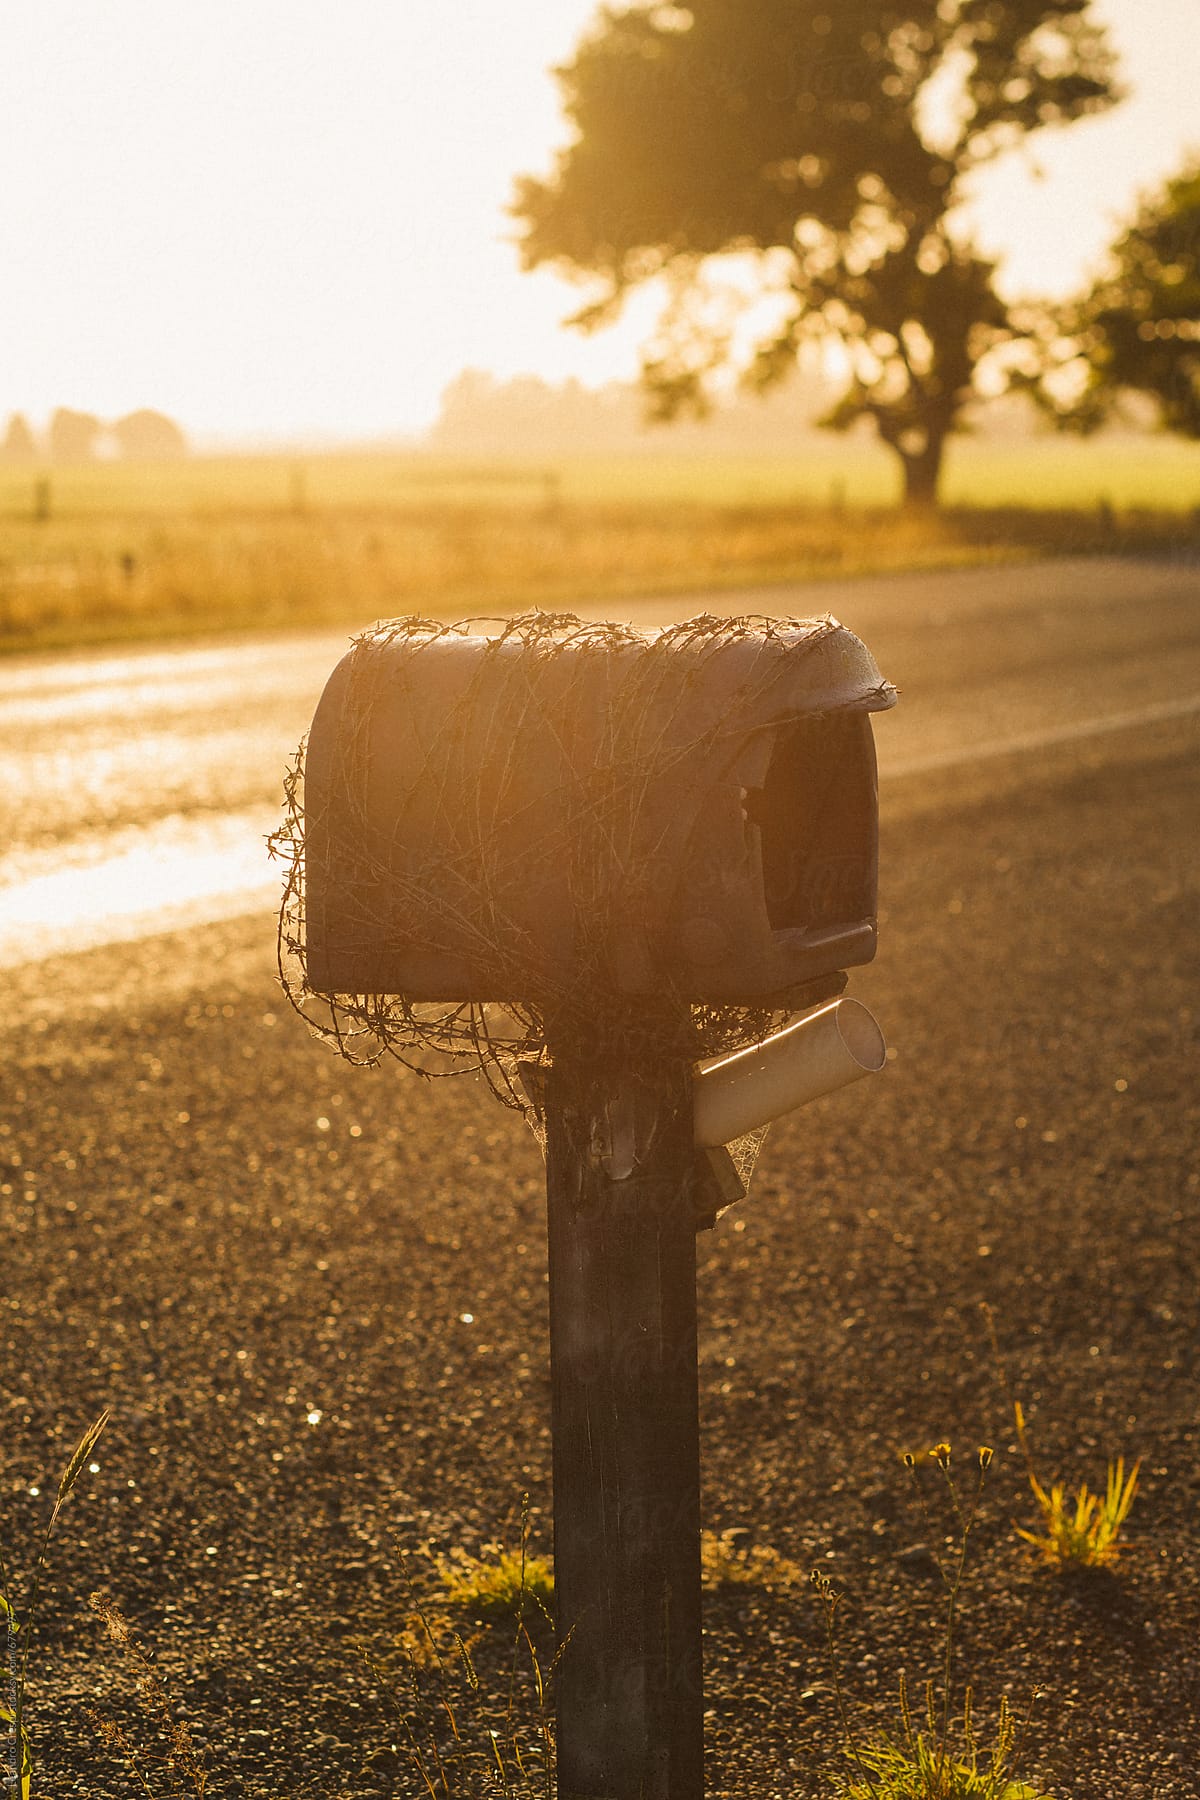 A mailbox lit by the sun in the field